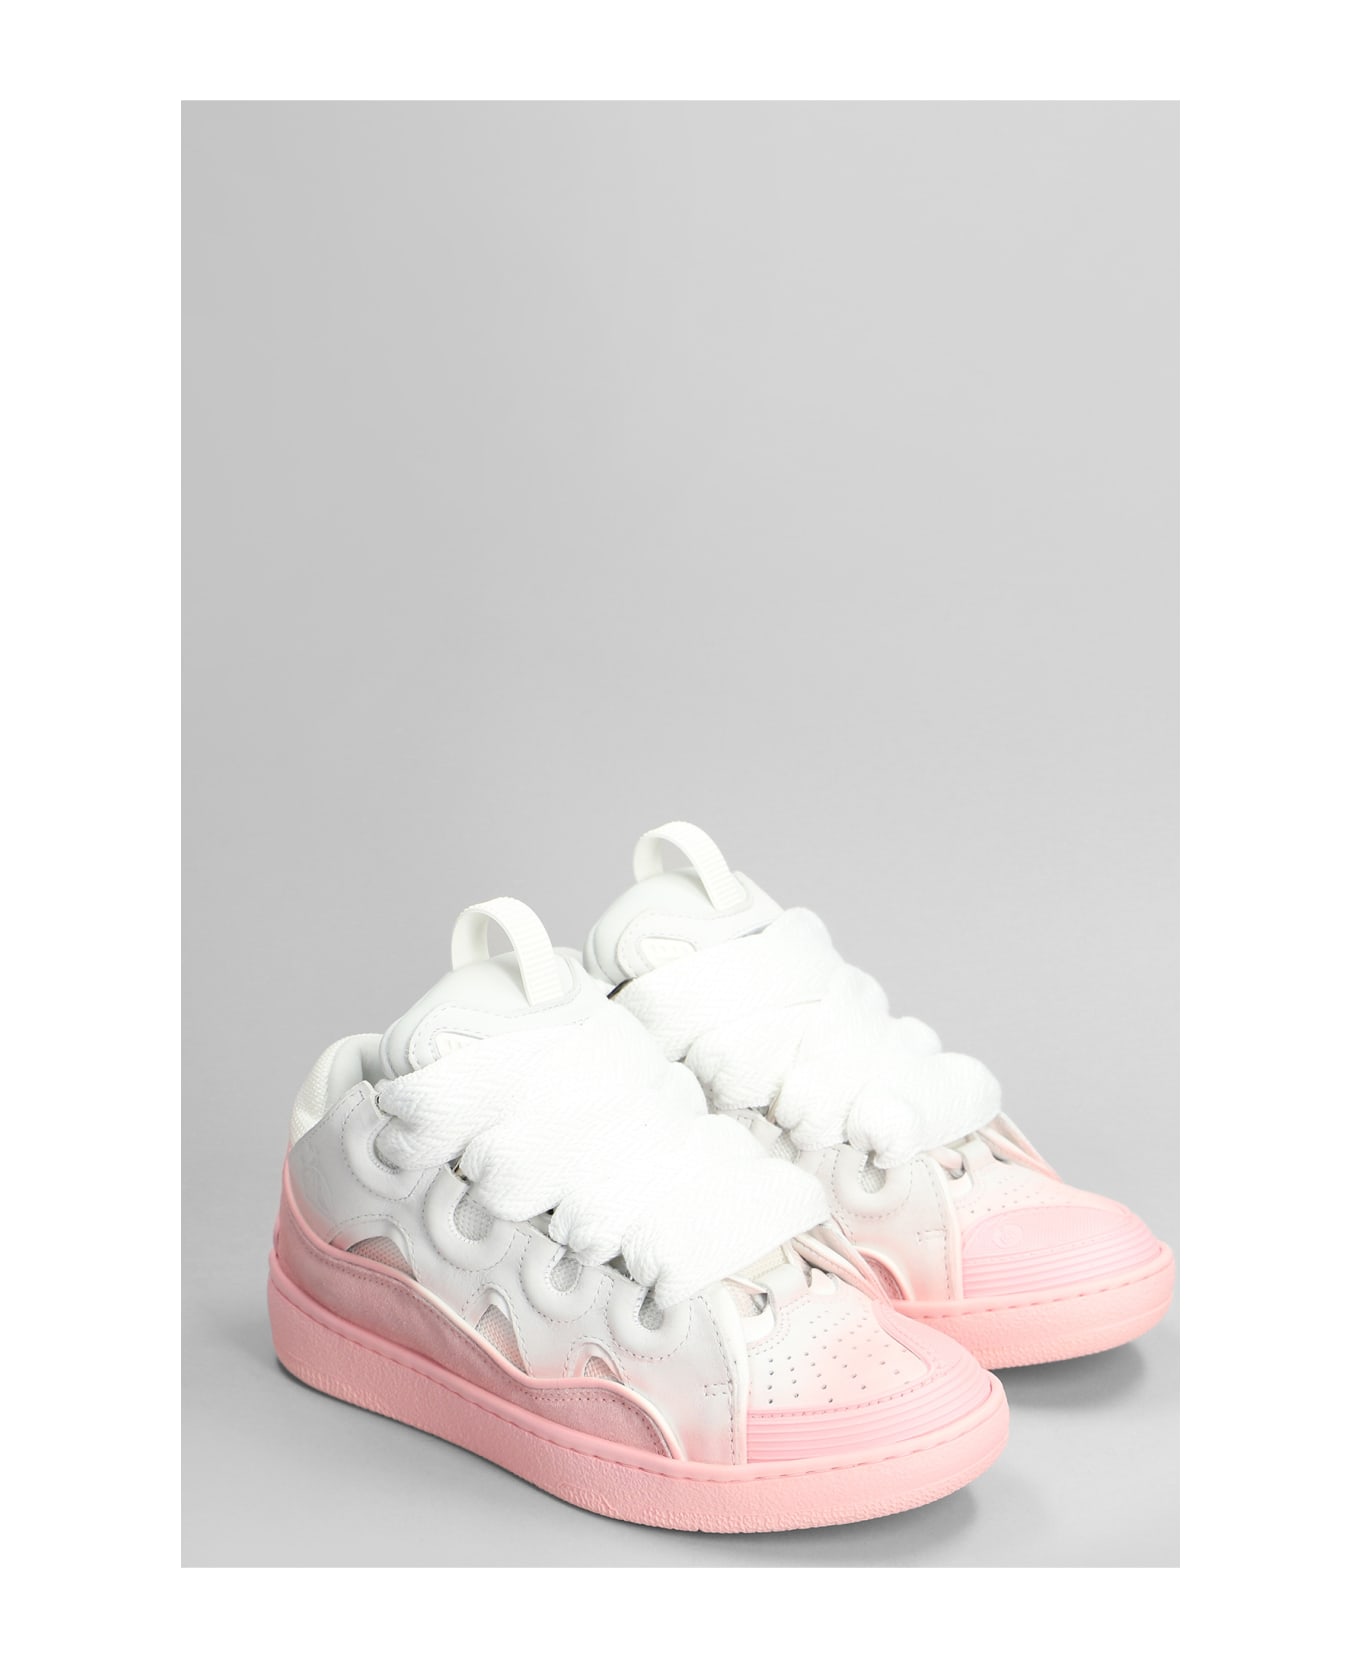 Lanvin Curb Sneakers In Rose-pink Leather - rose-pink